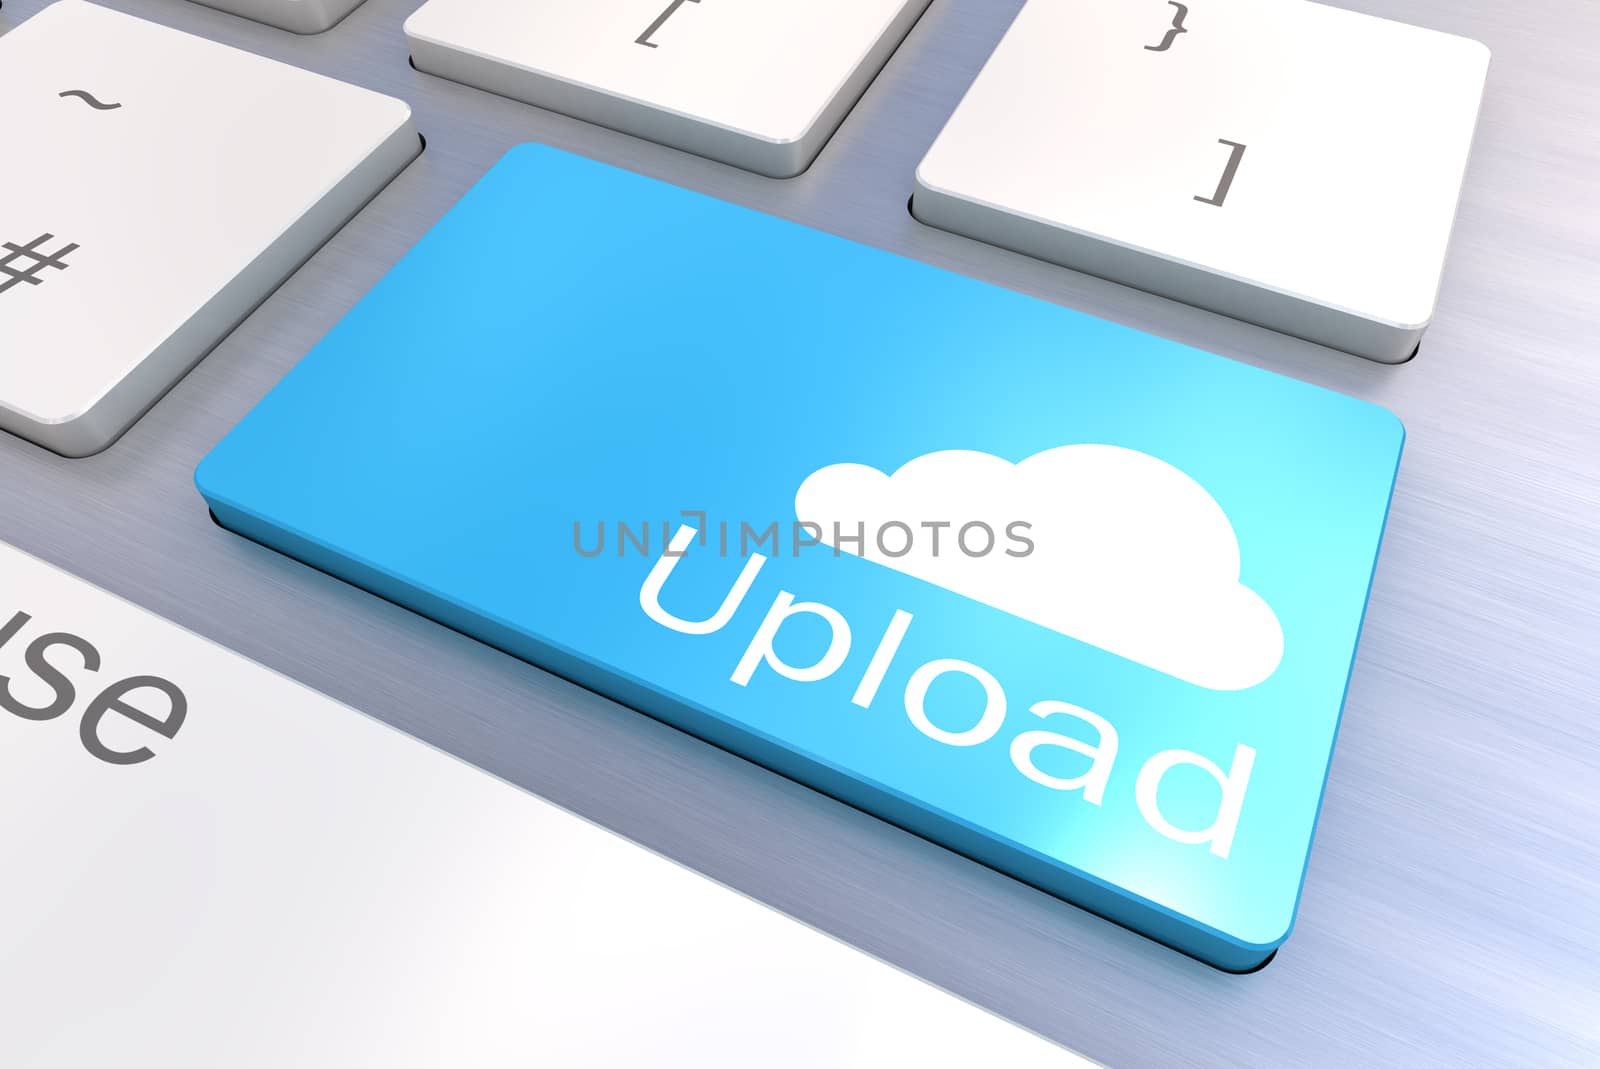 A Colourful 3d Rendered Illustration showing a Cloud Upload Concept on a Computer Keyboard